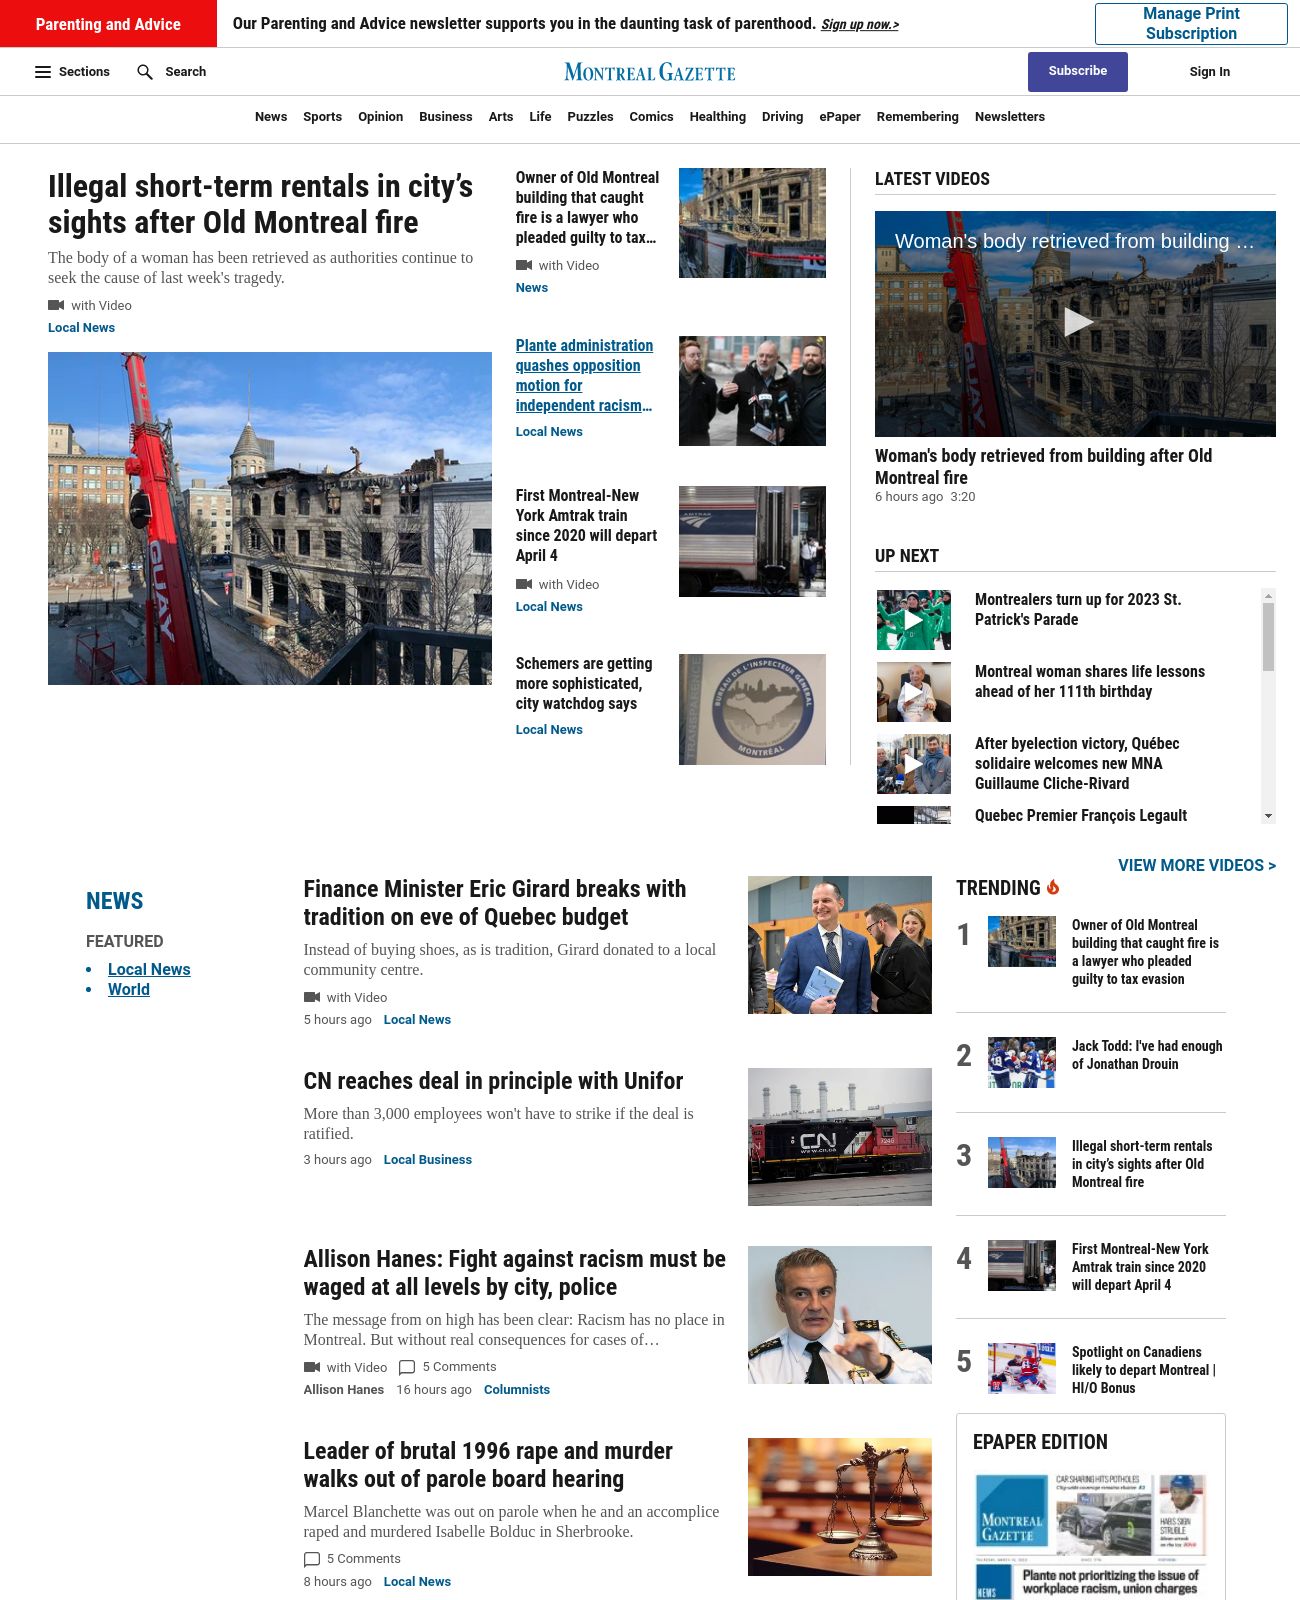 Montreal Gazette at 2023-03-20 22:25:03-04:00 local time